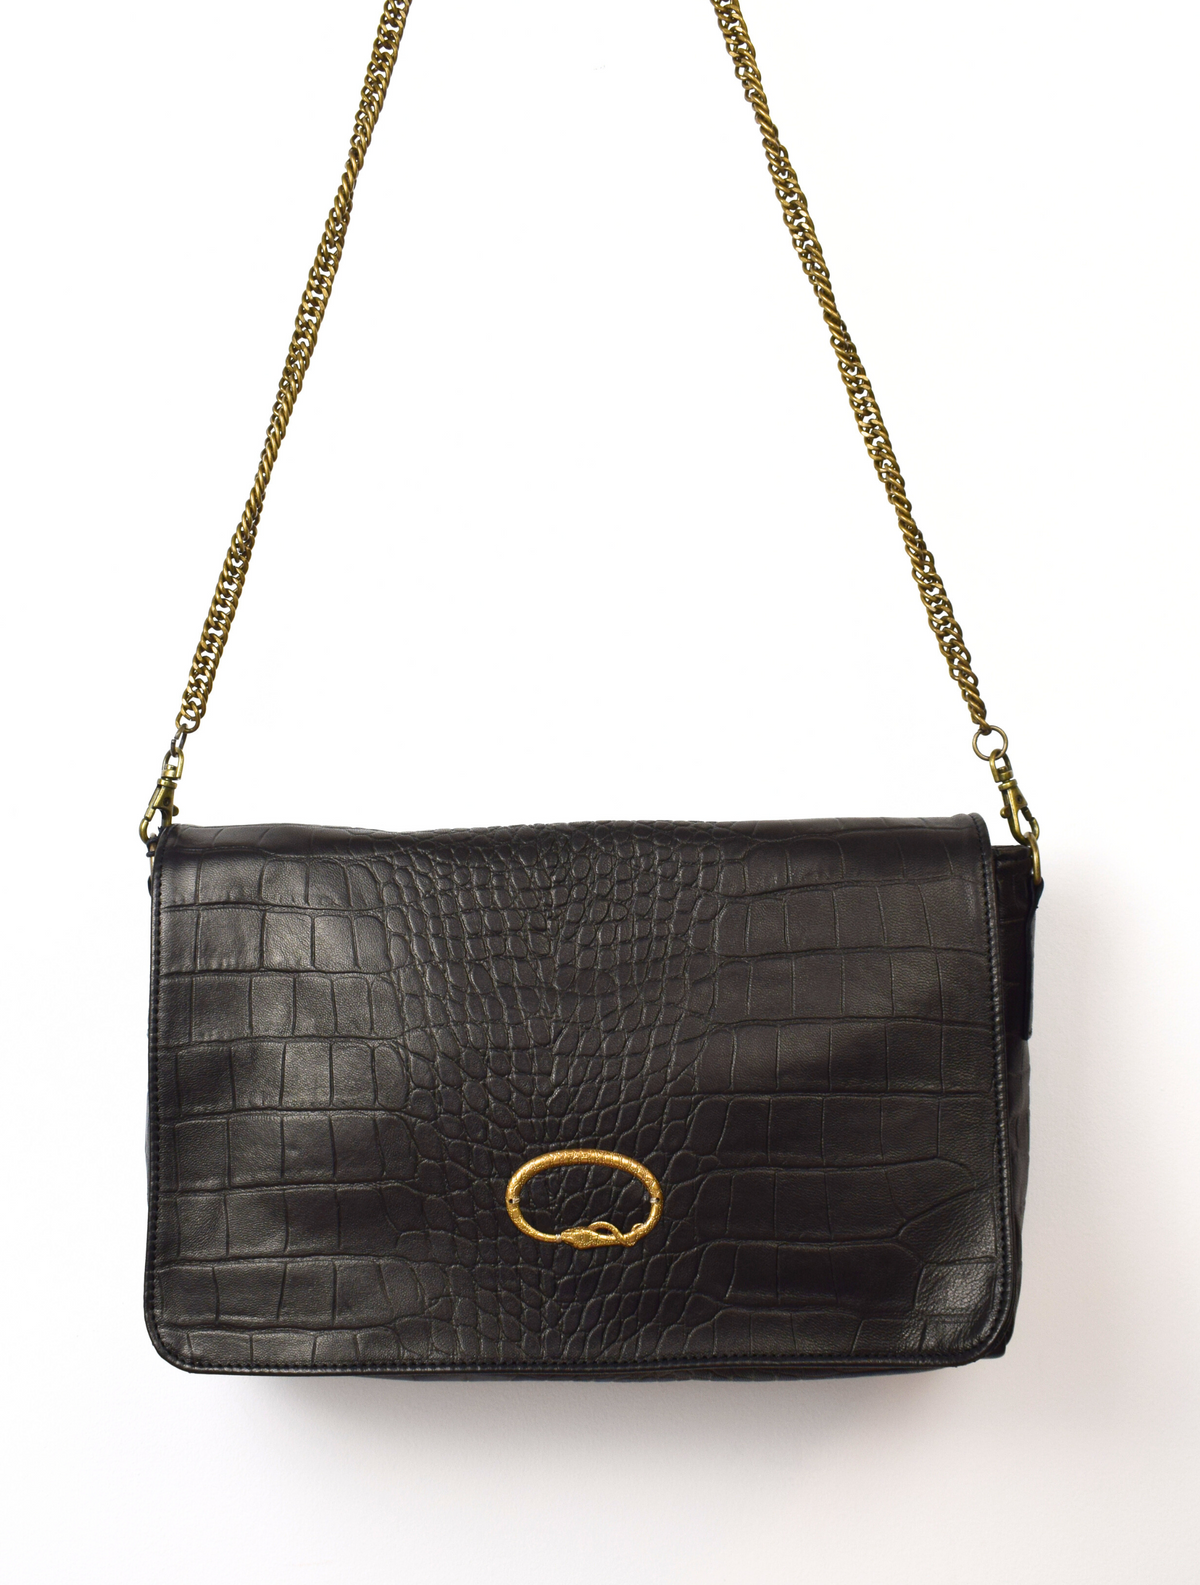 Black mock croc leather handbag with removable chain strap and cobra stomp detail